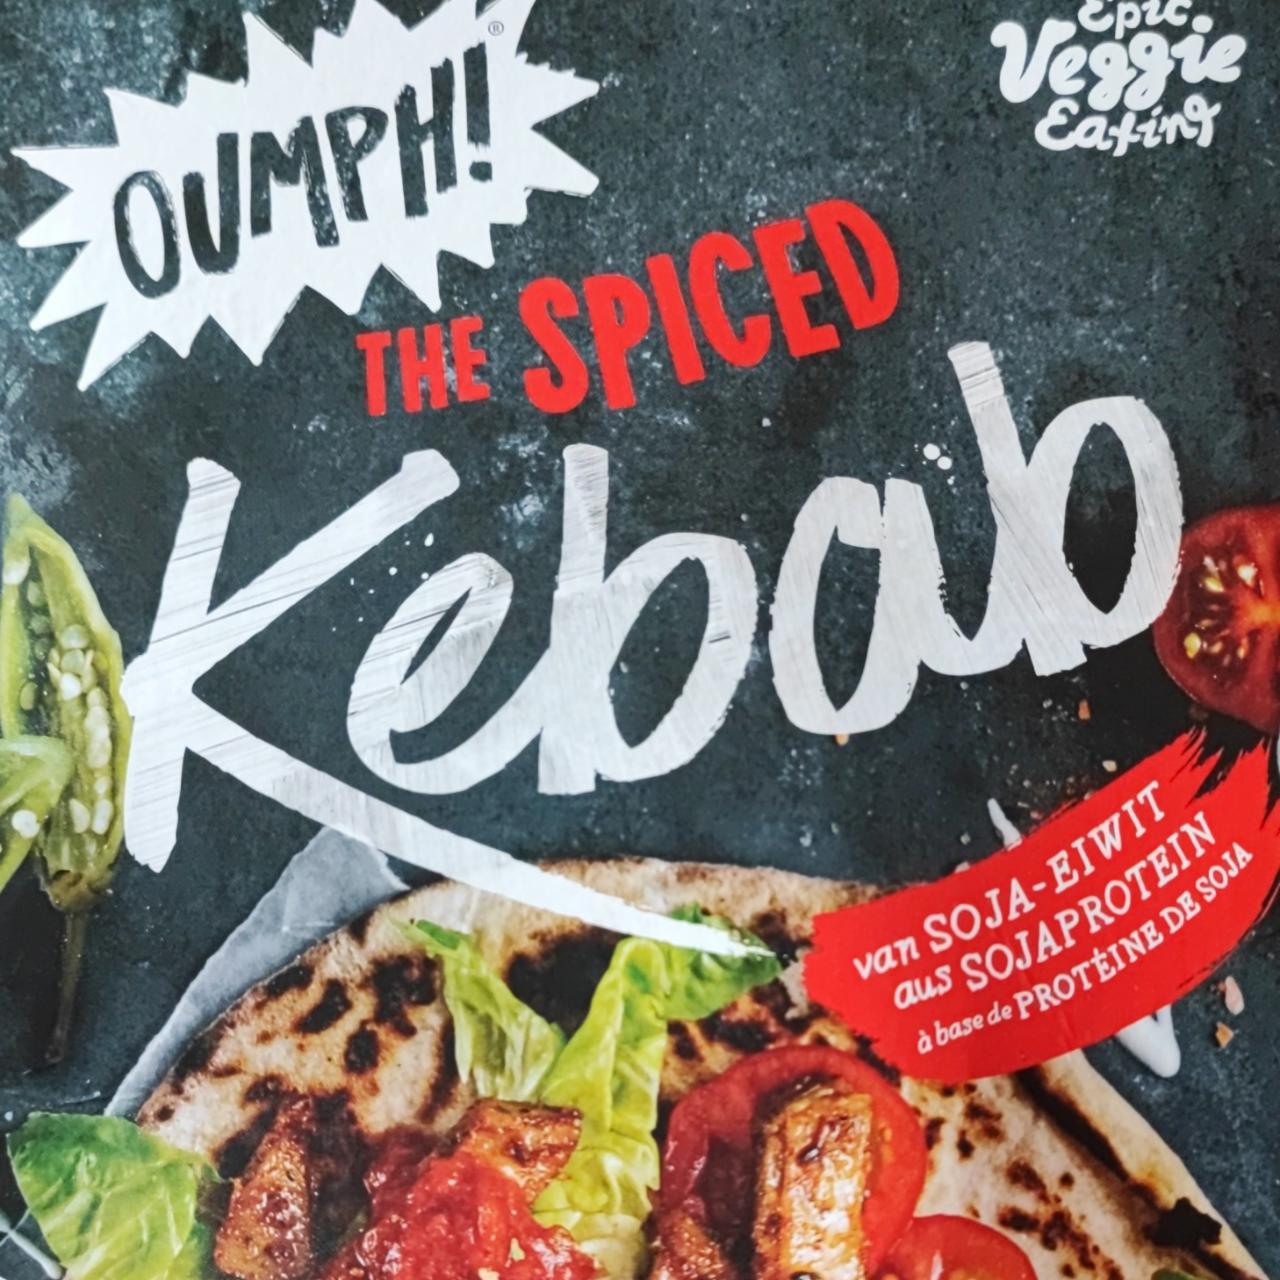 Fotografie - The spiced Kebab Oumph!